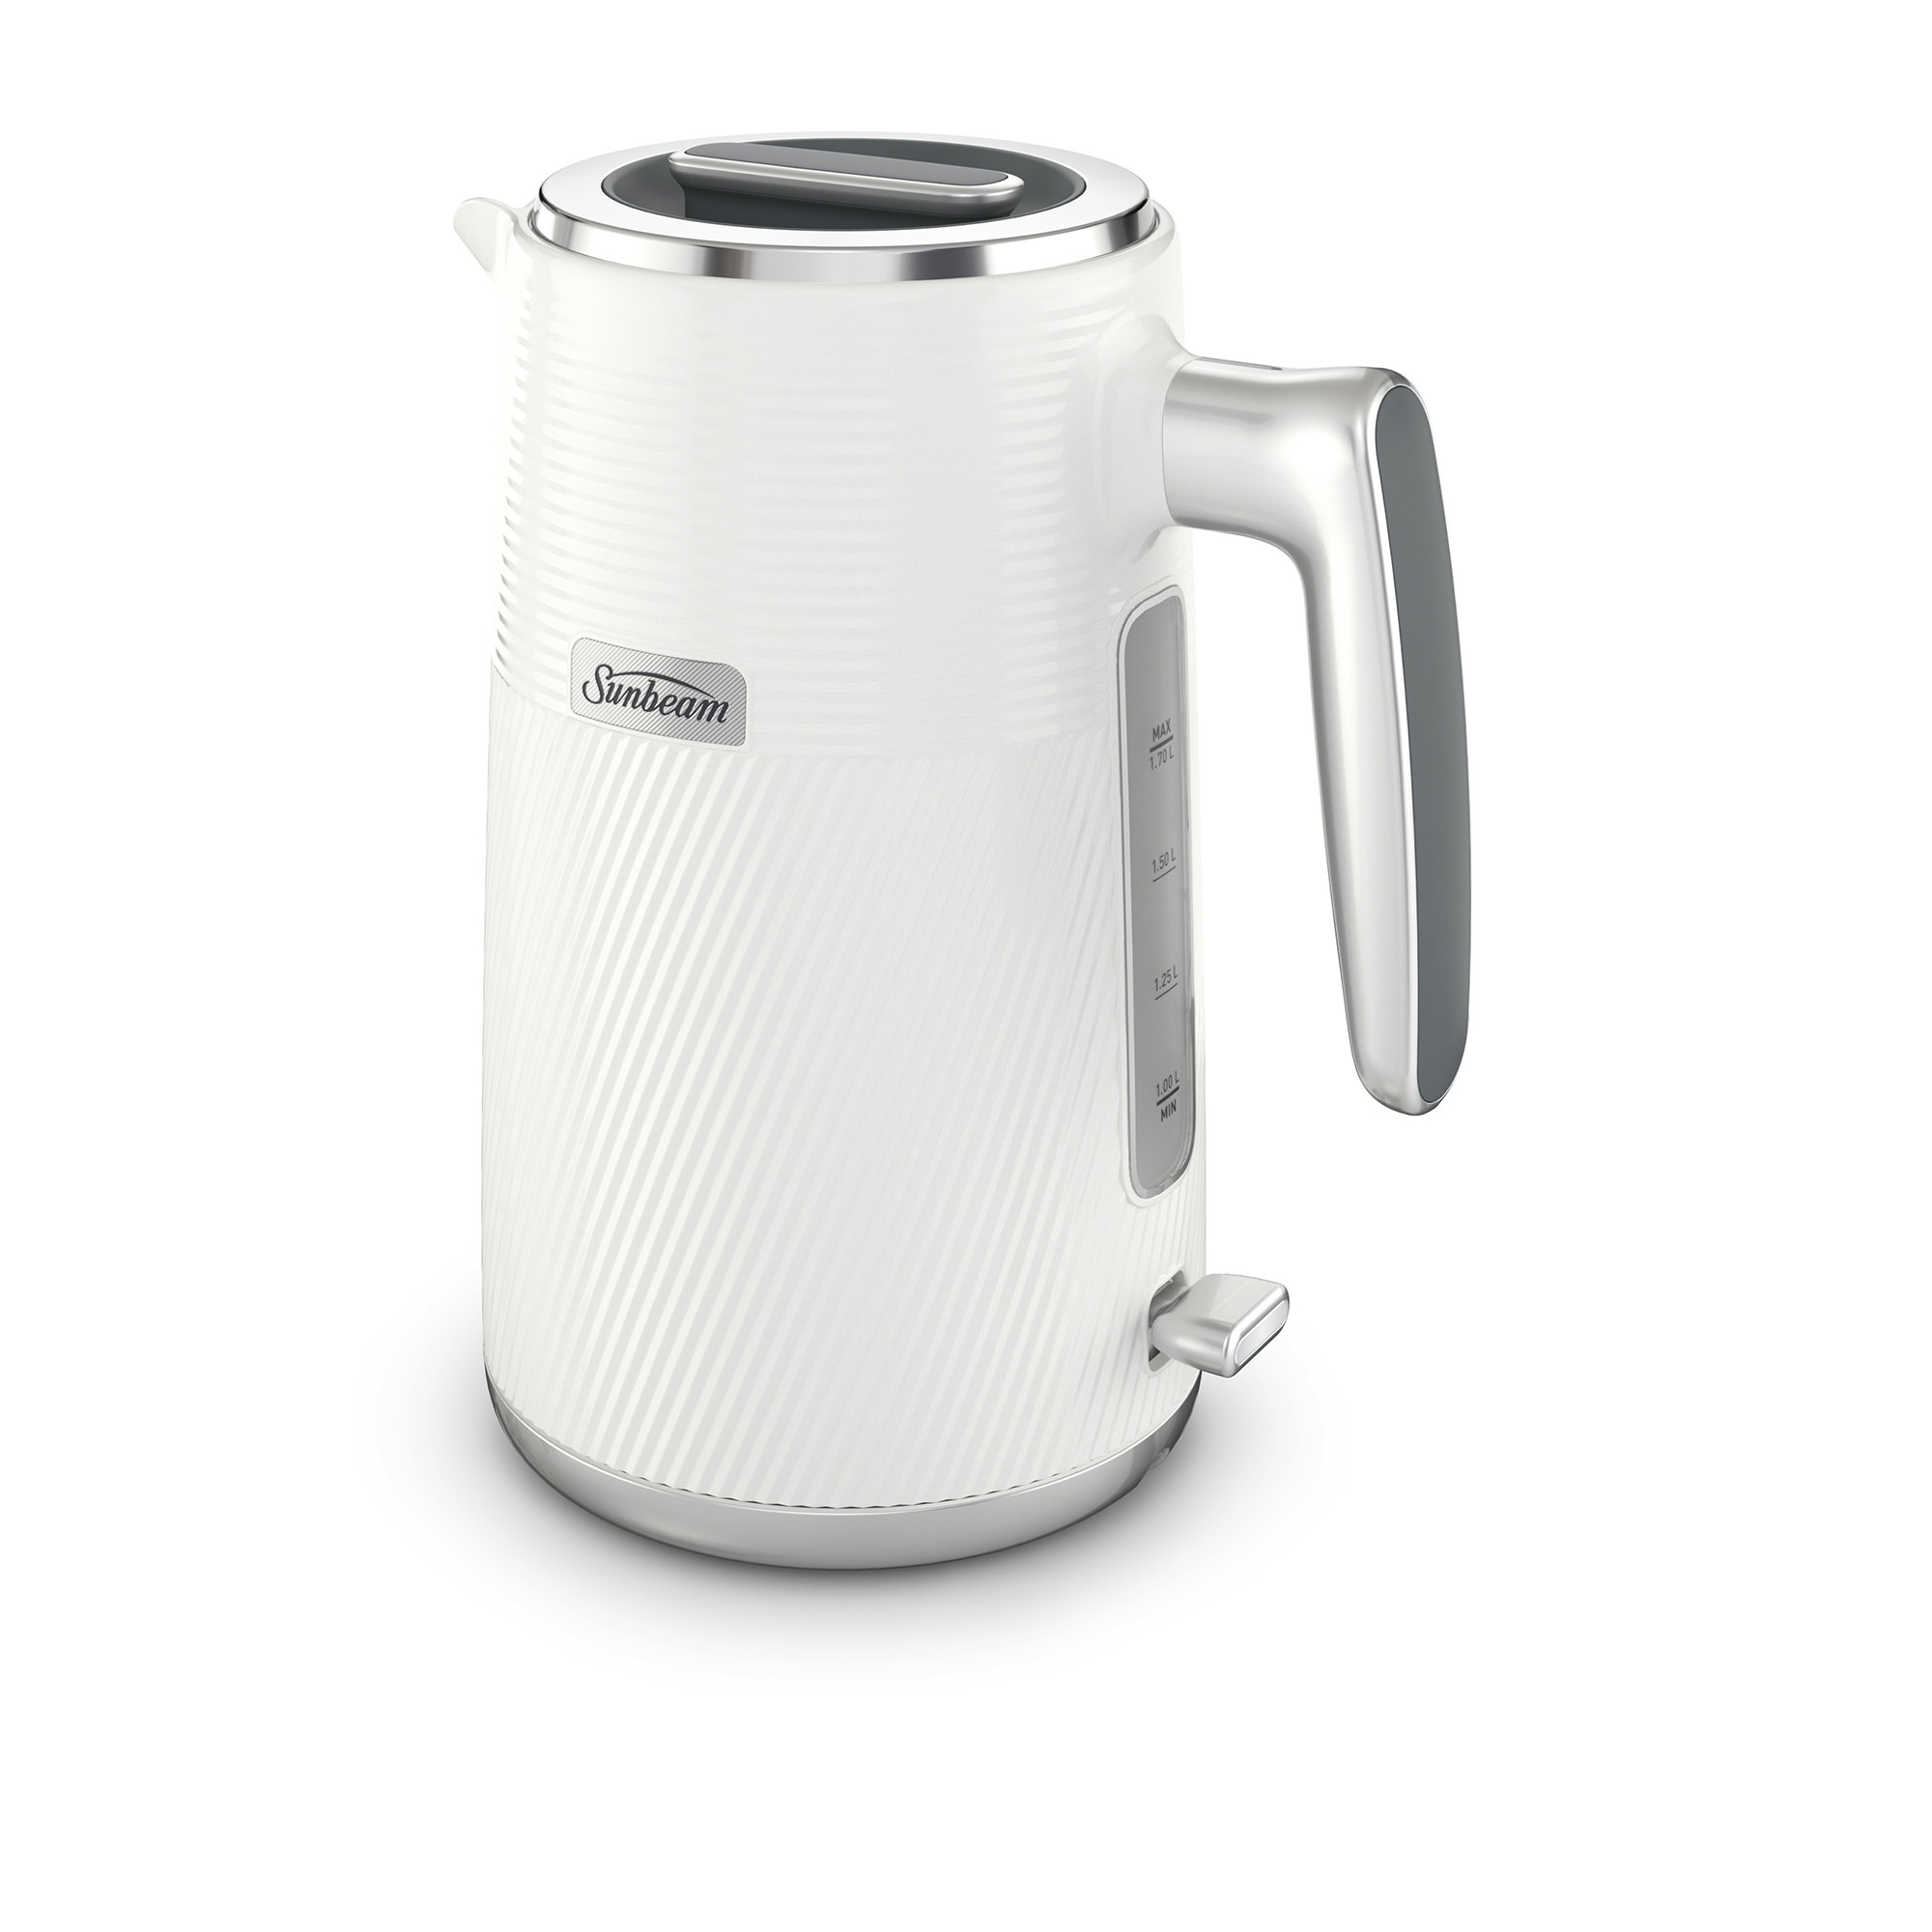 Sunbeam Obliq Collection KEP3007WH Electric Kettle 1.7L White Image 2